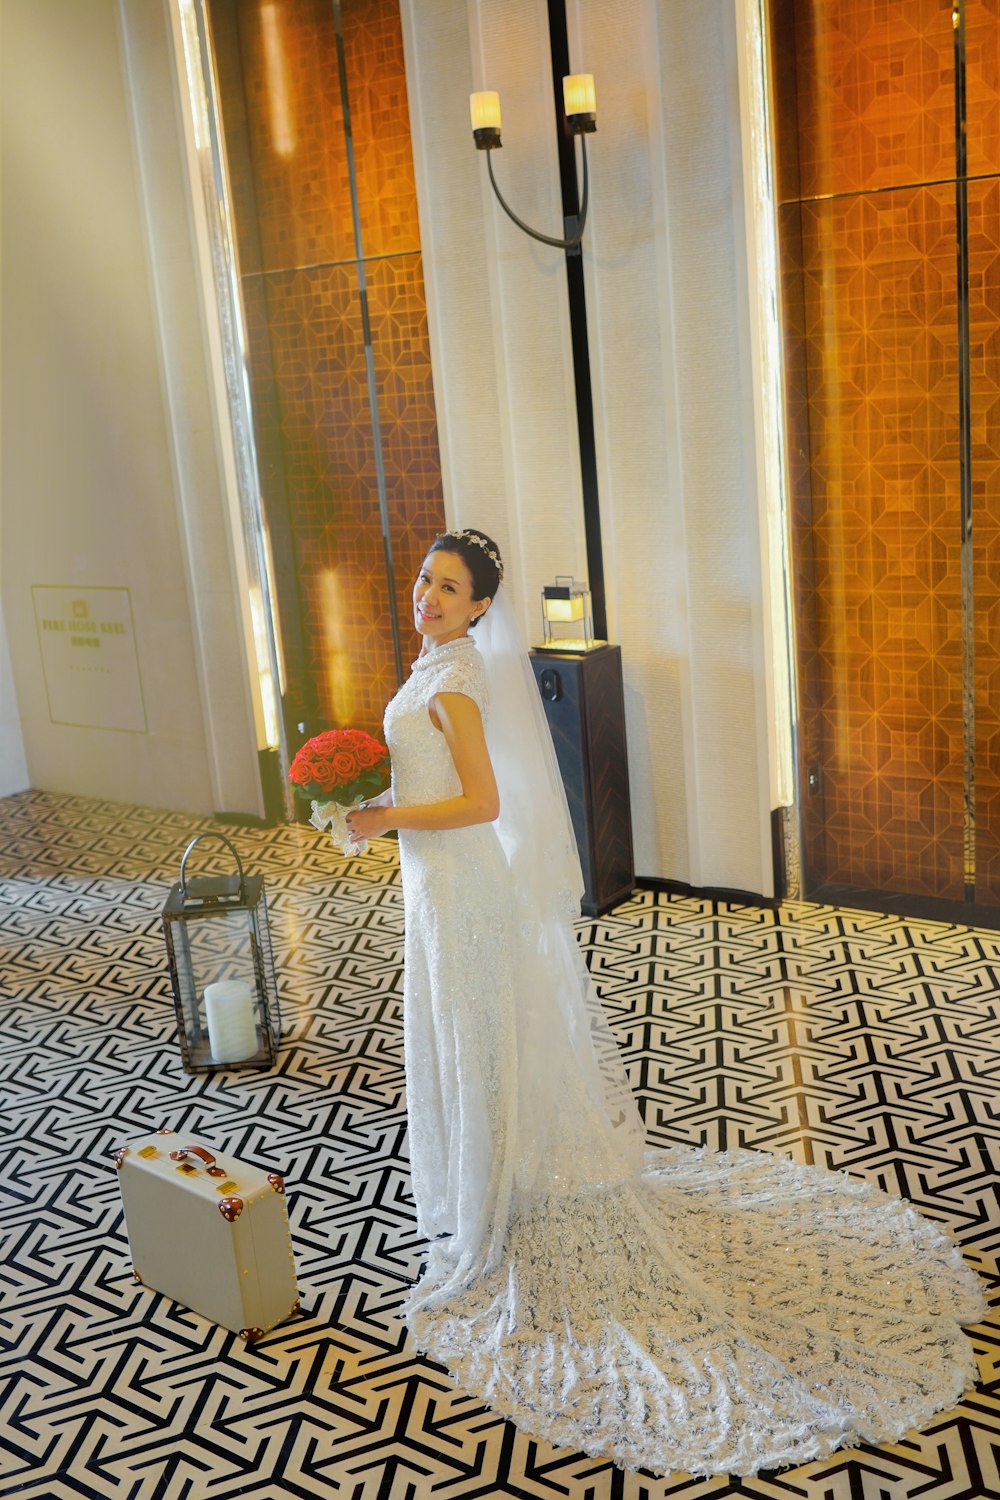 woman in white wedding dress standing on brown and white carpet